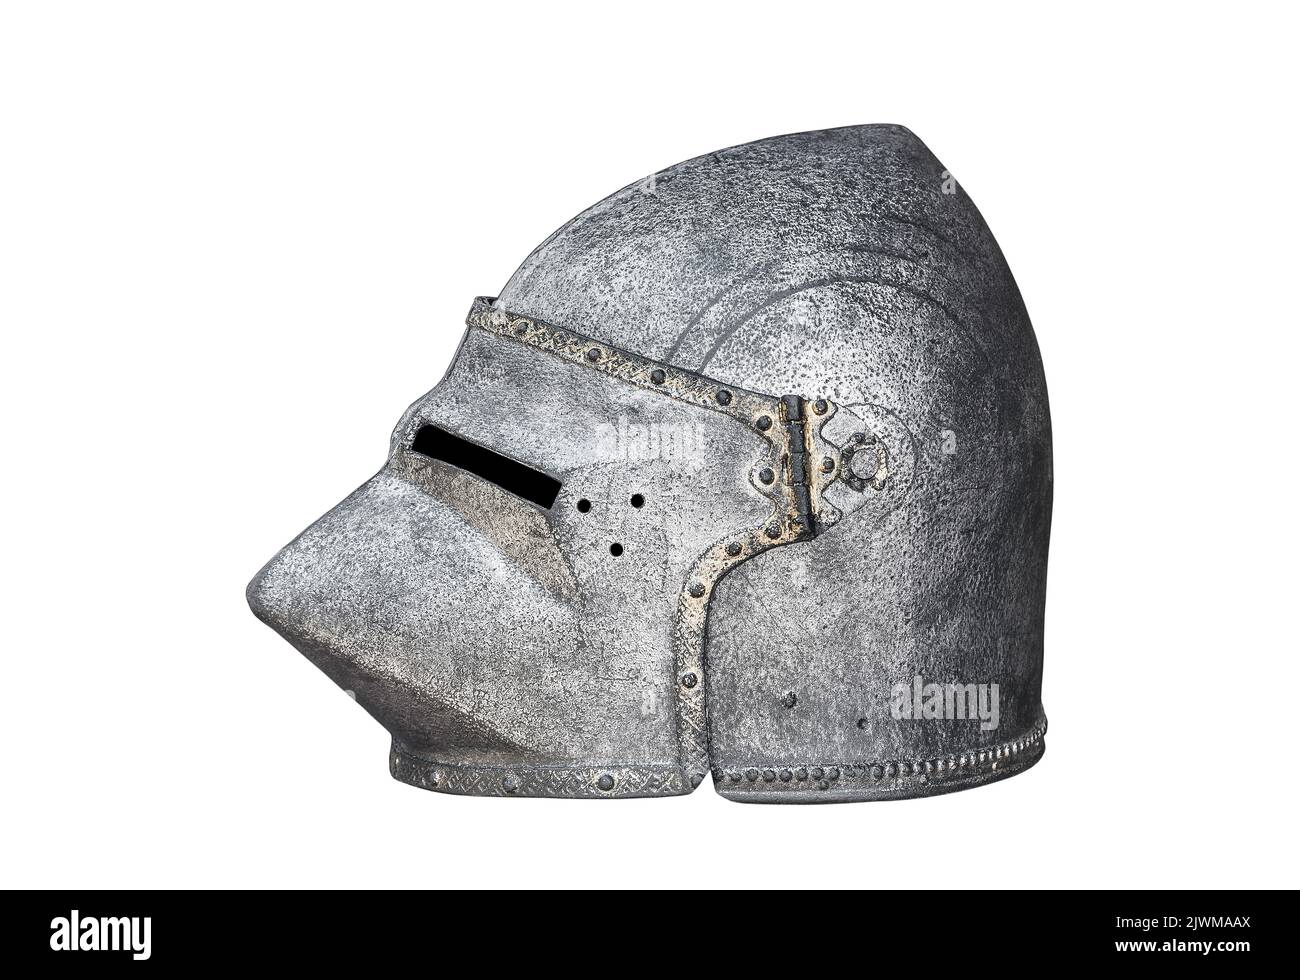 Medieval knight helmet isolated on white background with clipping path Stock Photo